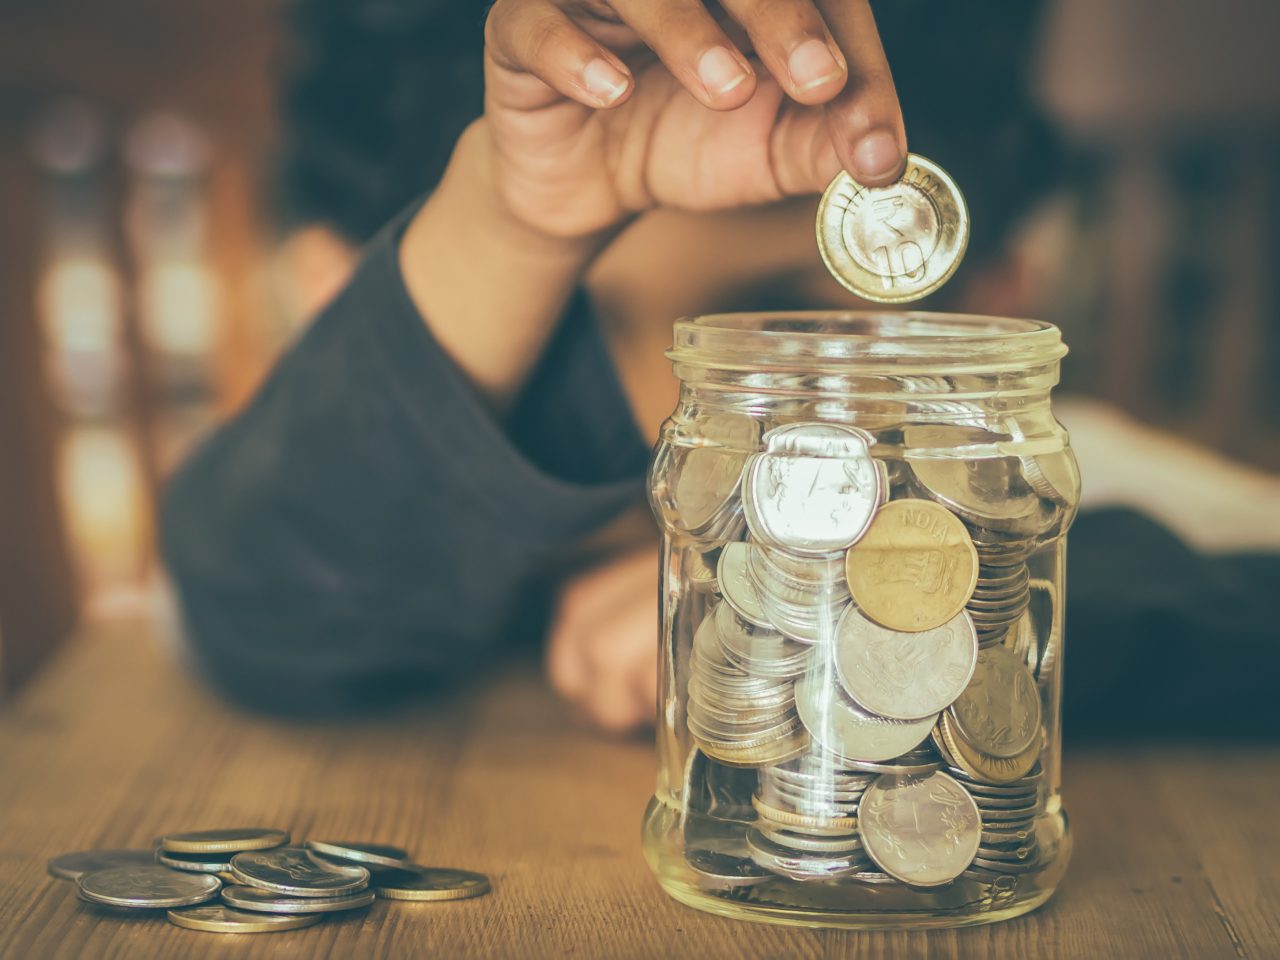 Yound child putting coins into a mason jar for savings.